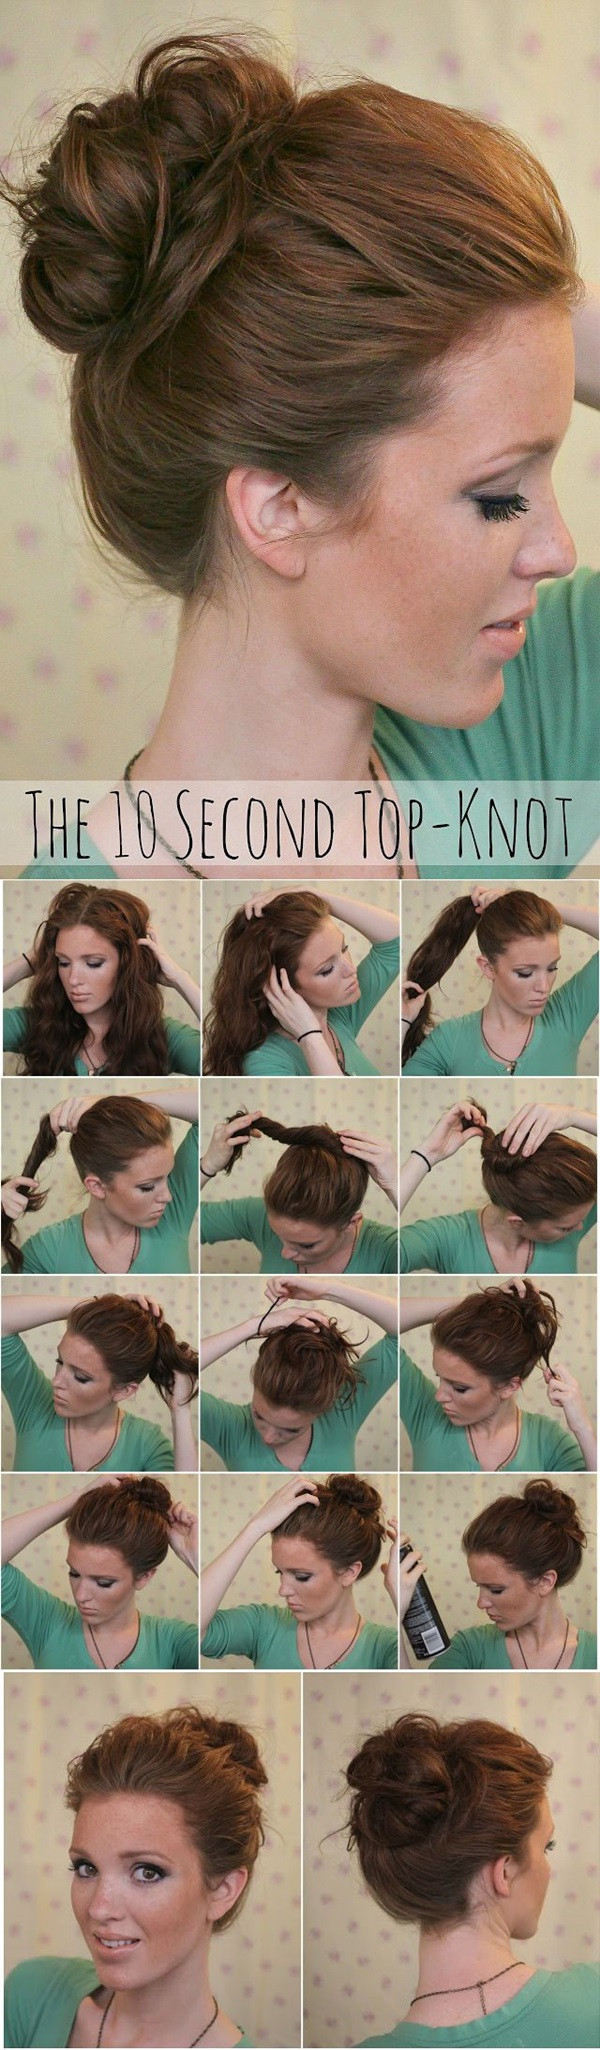 Easy Hairstyle Tutorials
 35 y and Easy Bun Hairstyle Tutorials For You